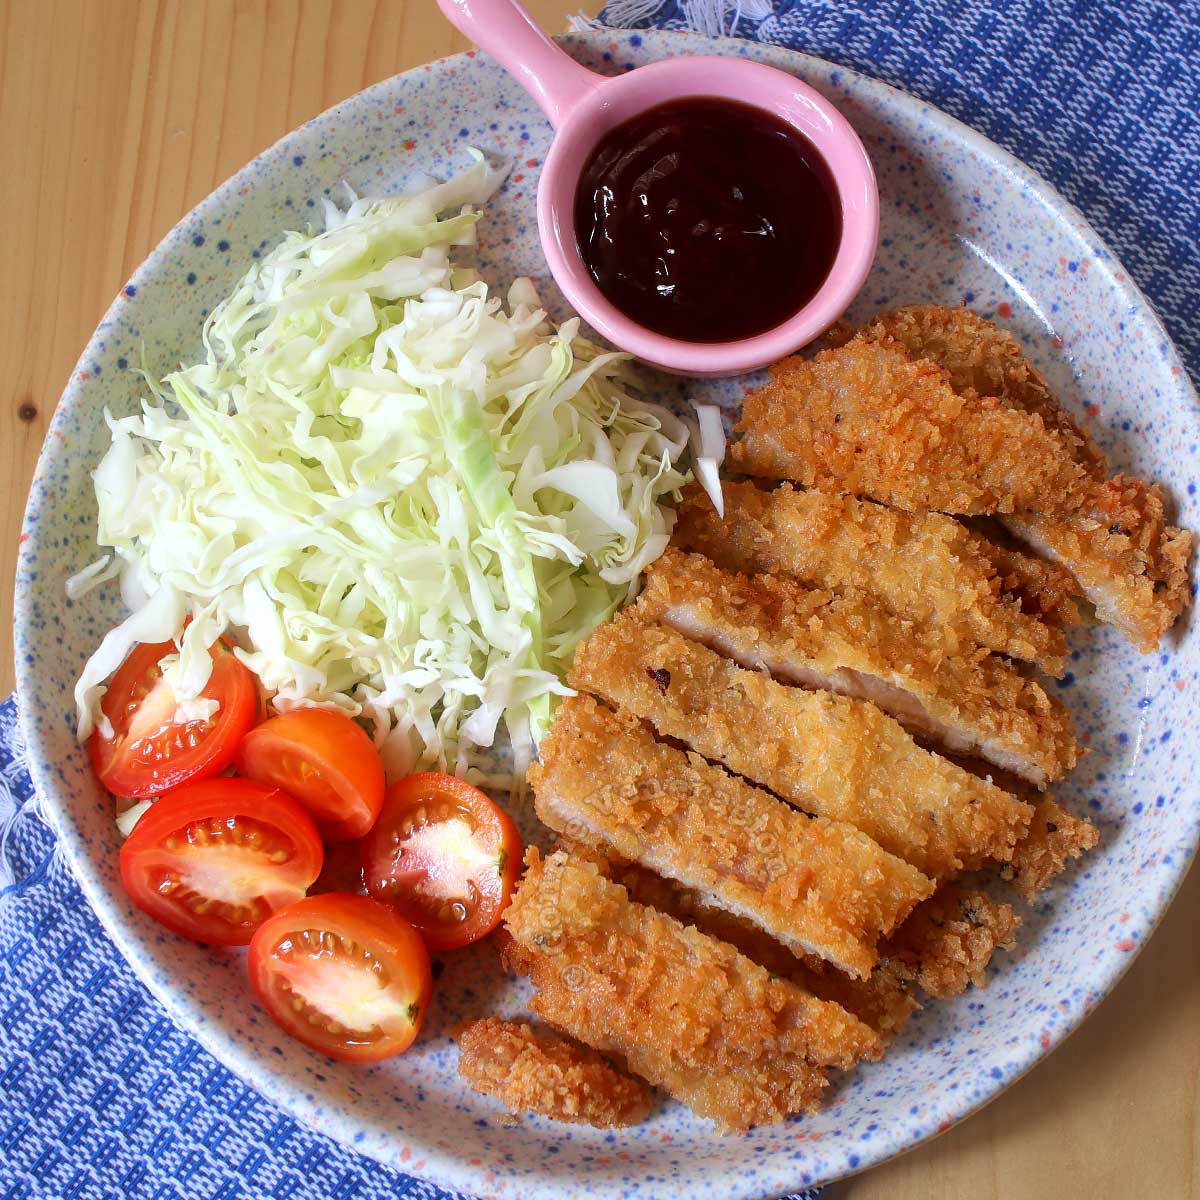 Tonkatsu (Japanese fried pork cutlet) with sauce and shredded cabbage